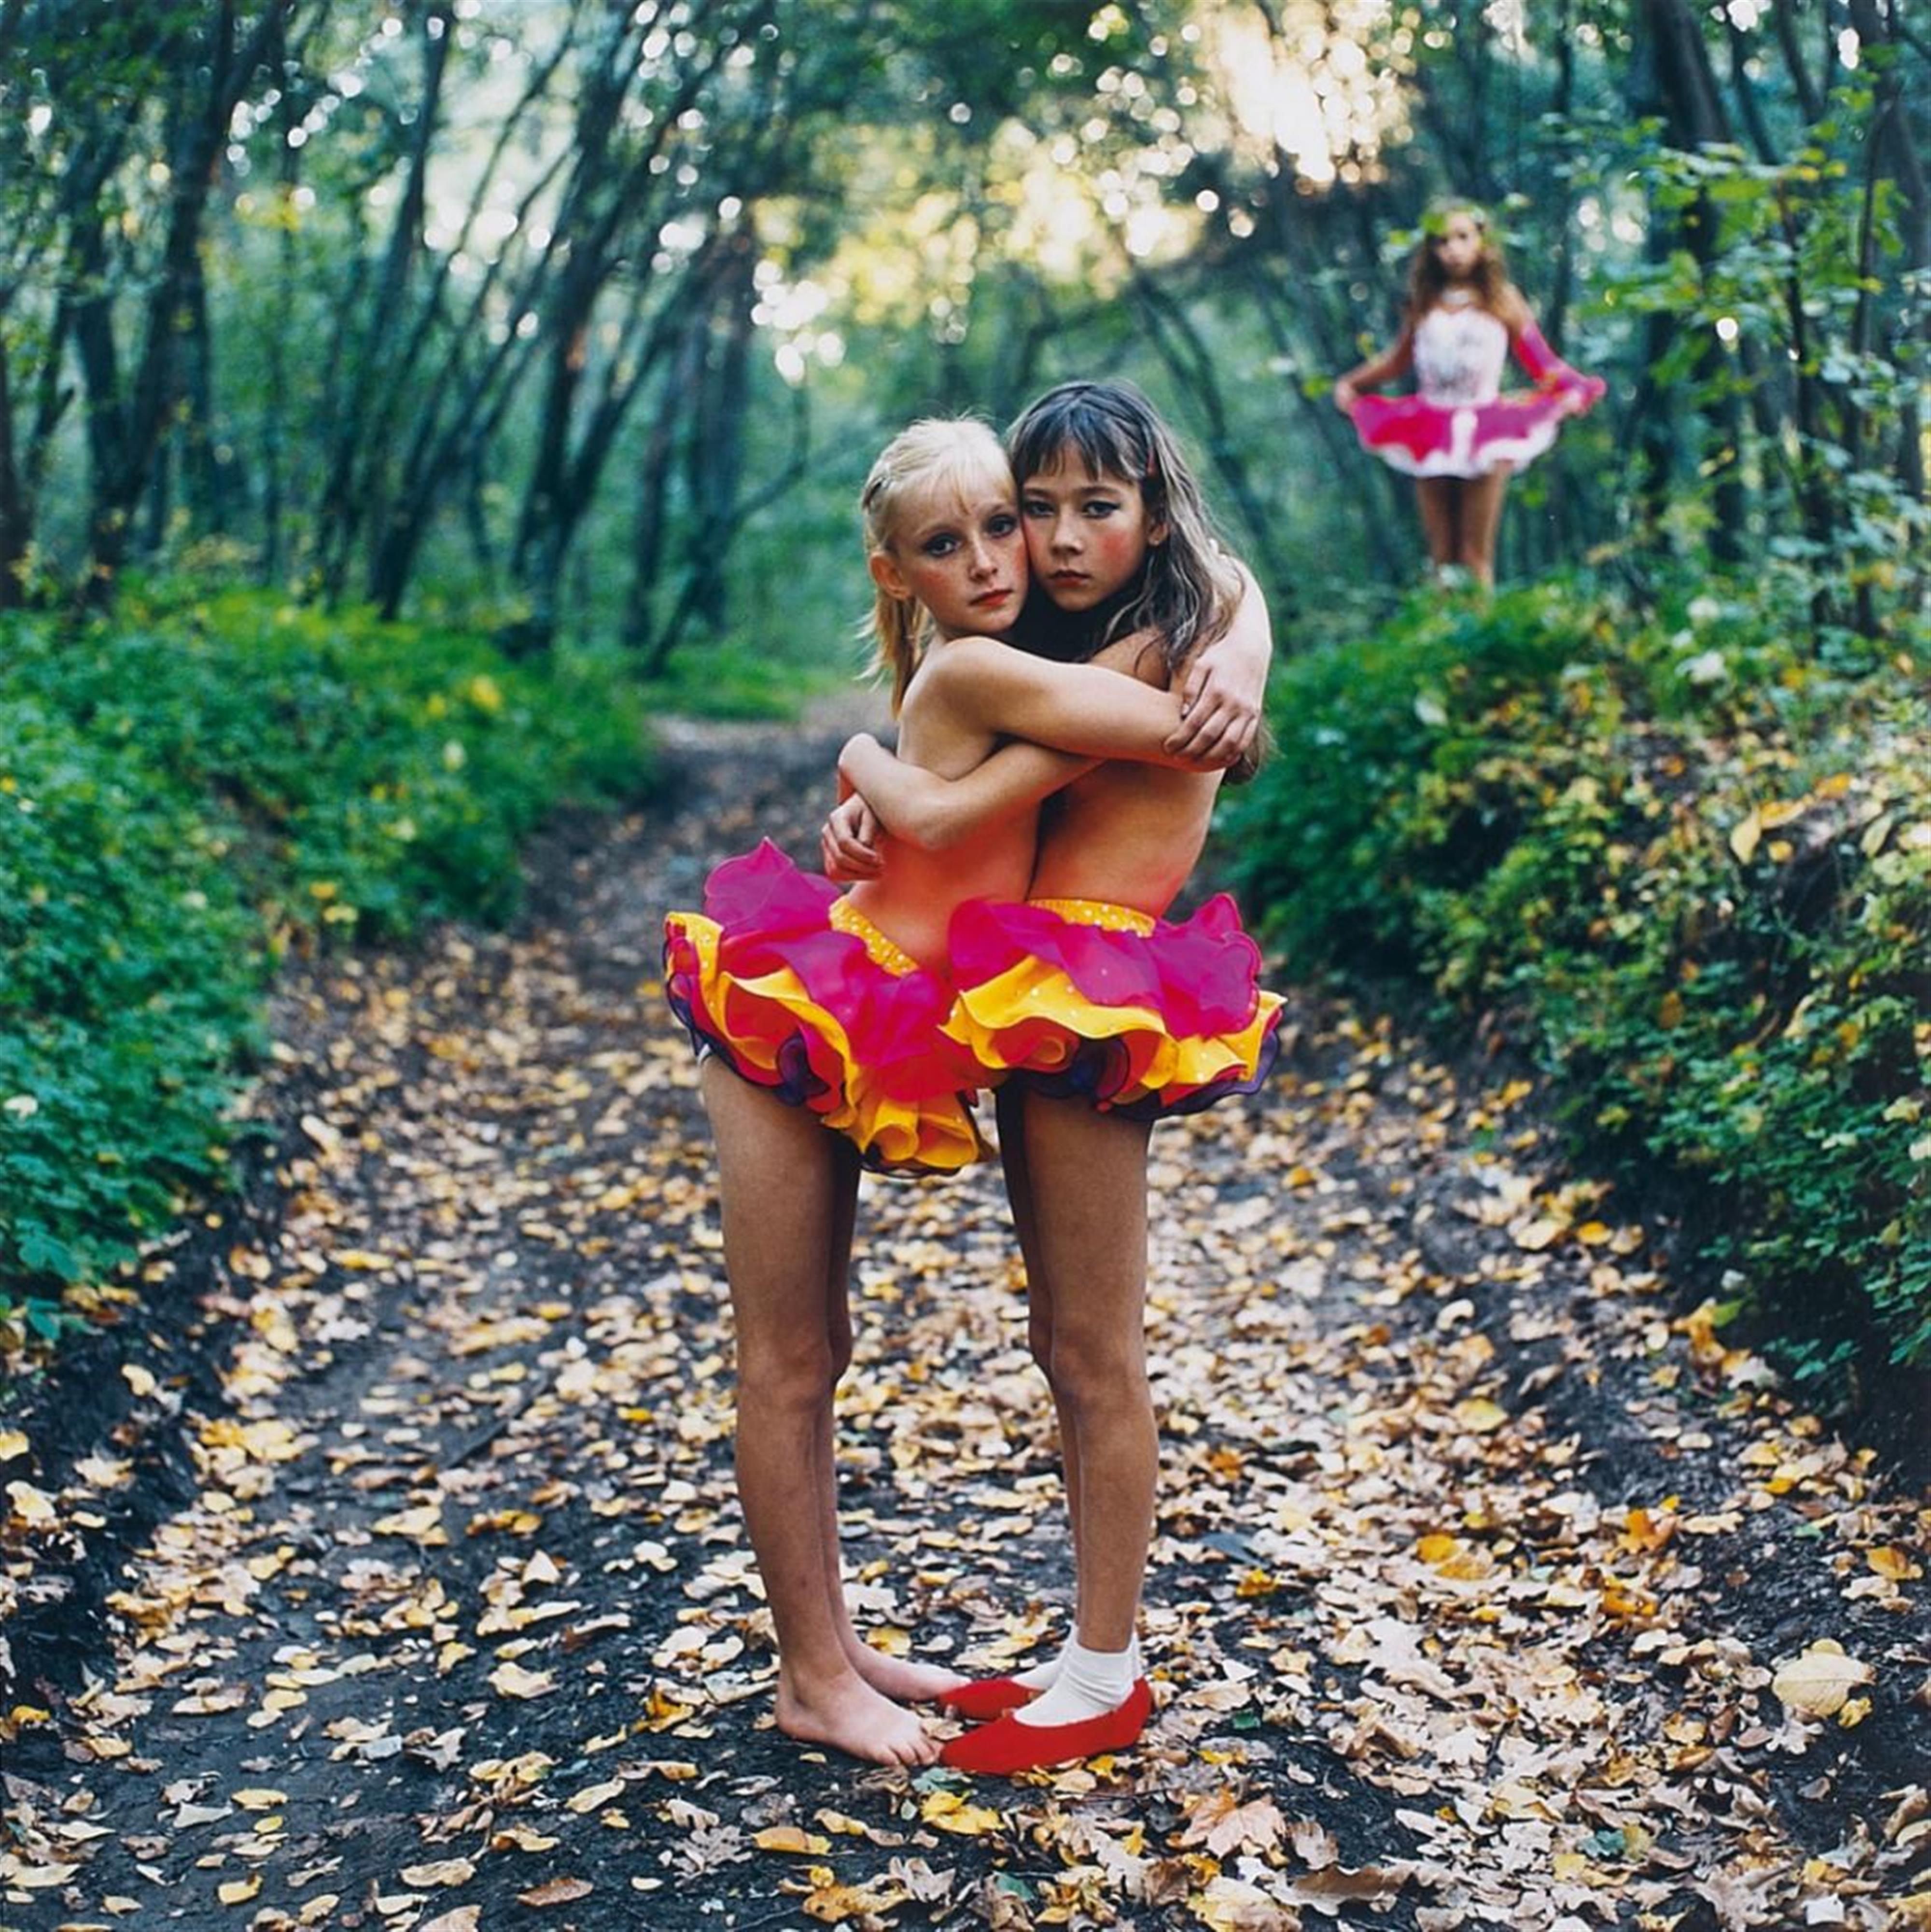 Michal Chelbin - Xenia, Janna and Alona in the Woods, Russia - image-1